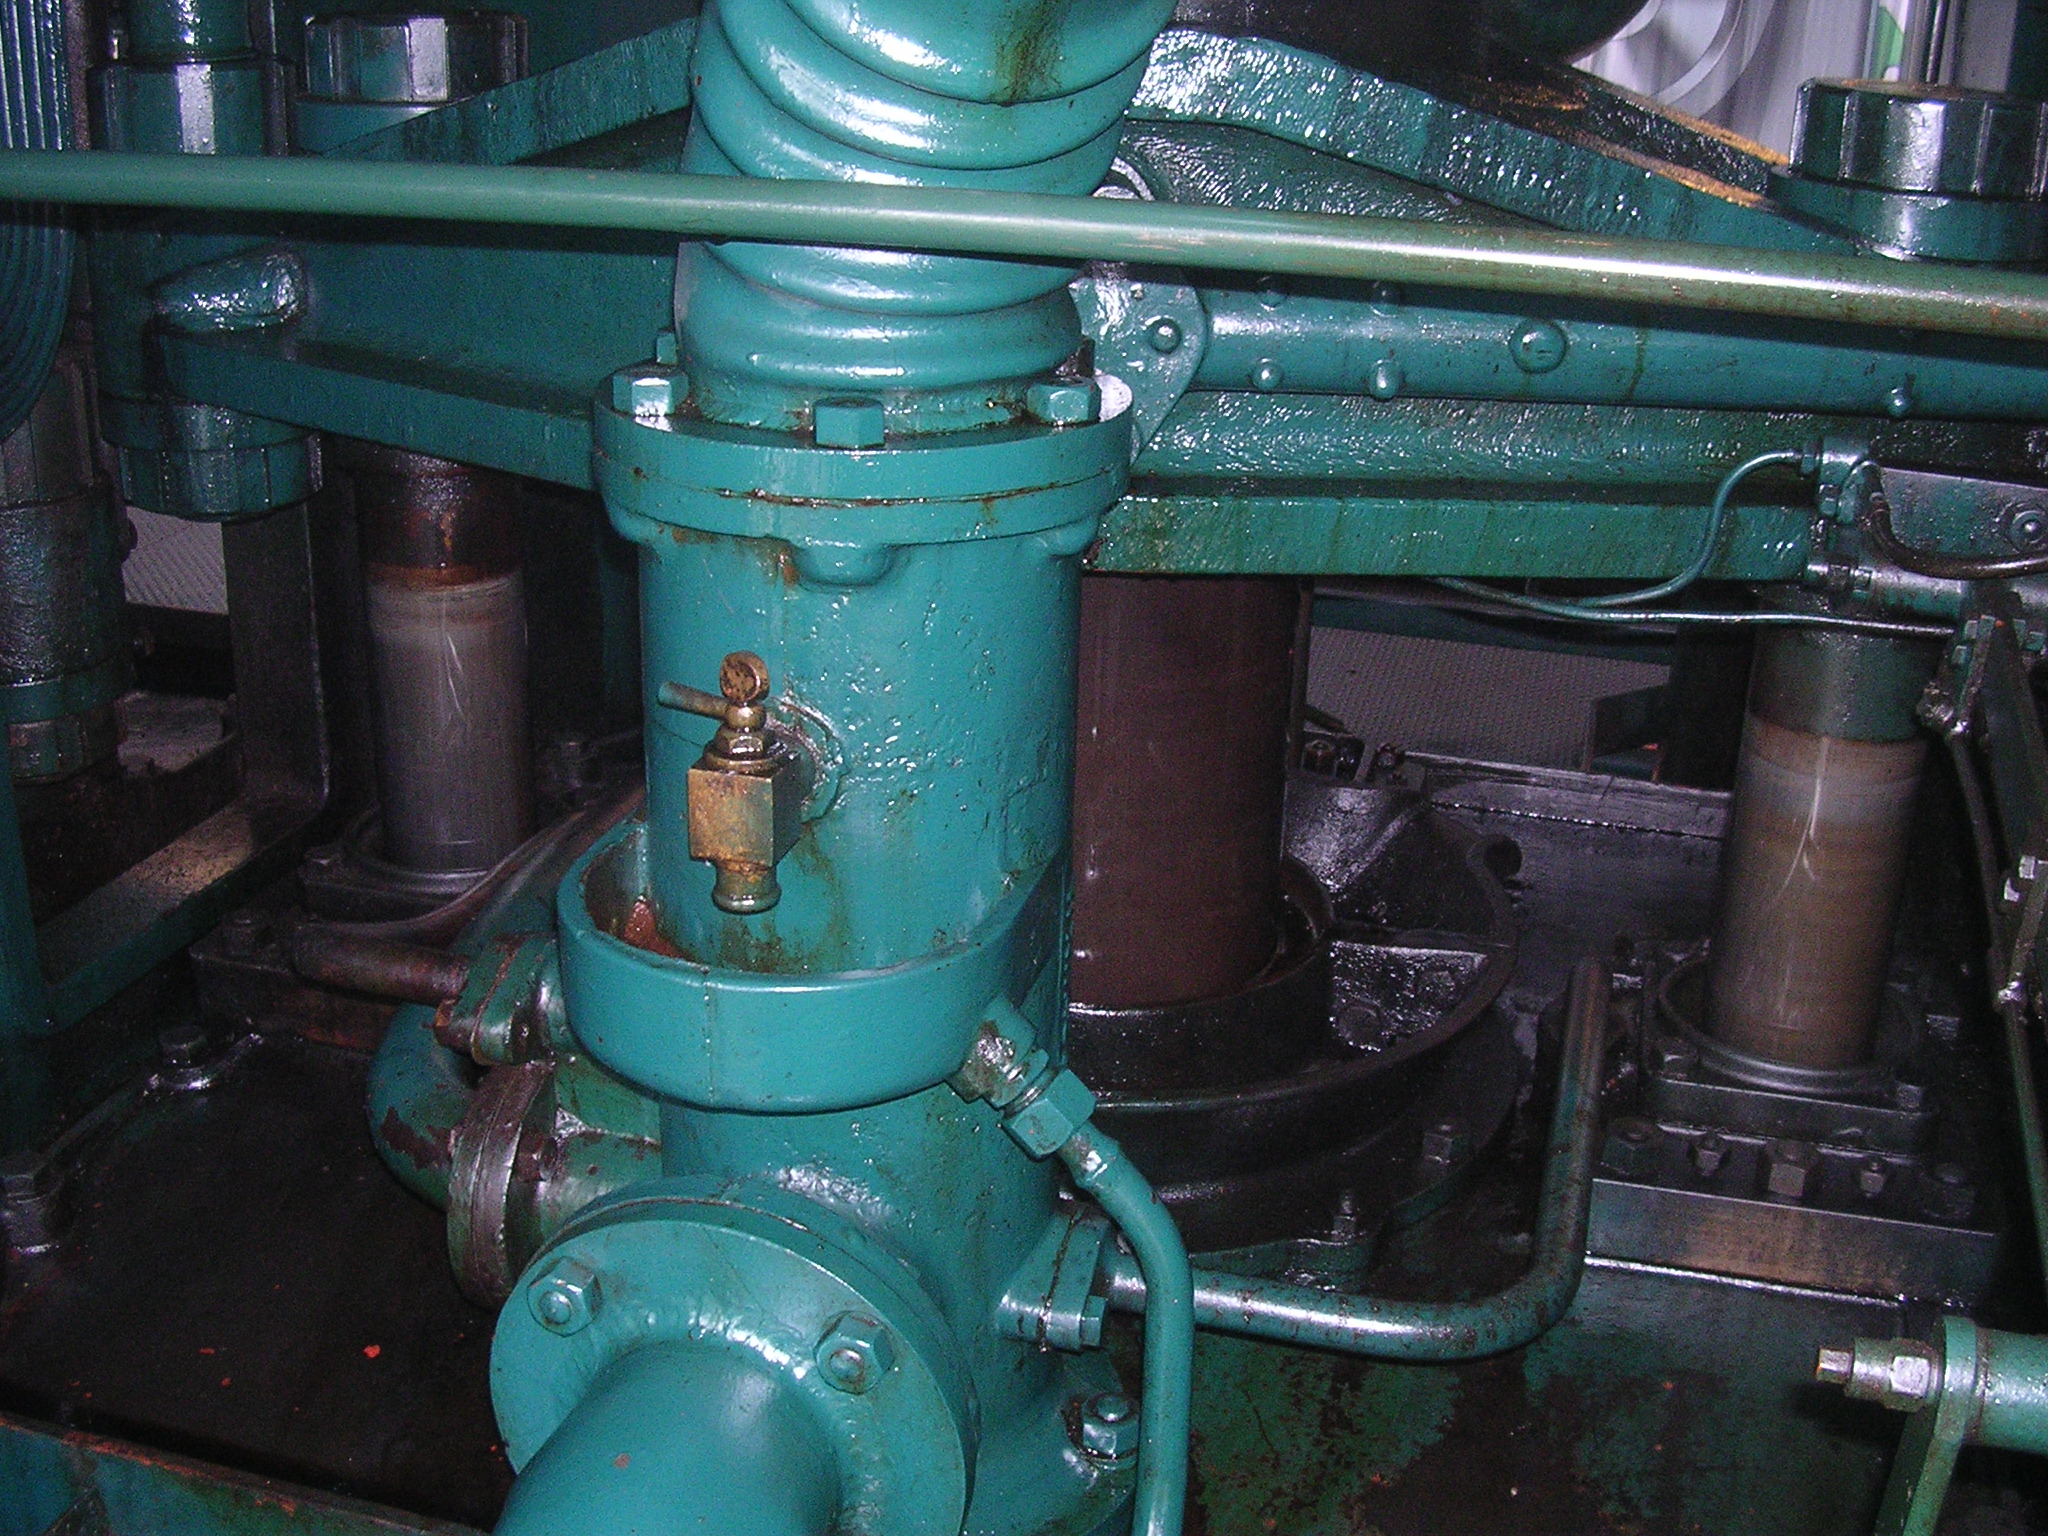 the pipe is connected to a valve and other metal equipment